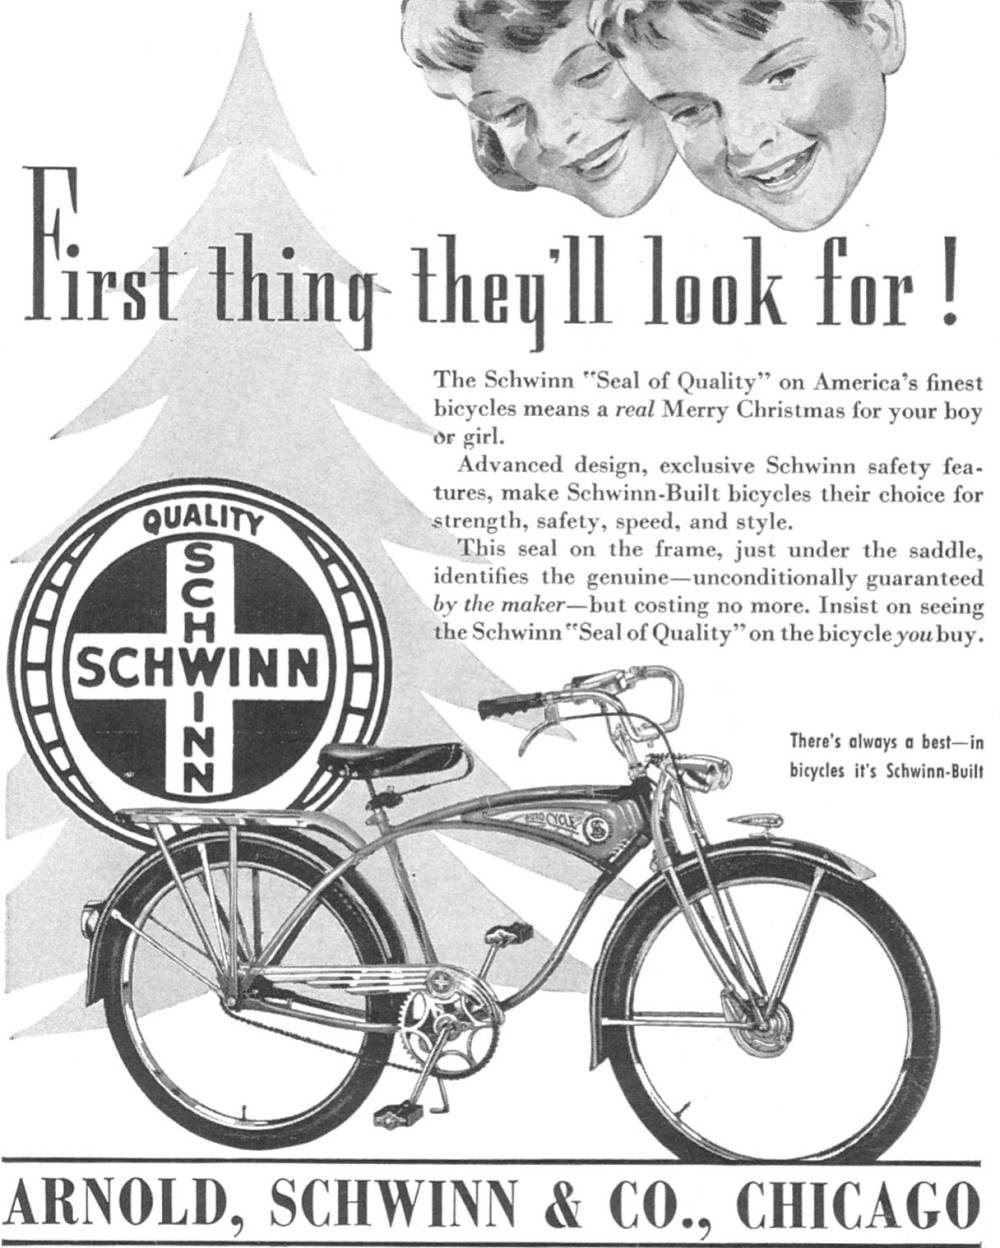 AD - CHICAGO - ARNOLD, SCHWINN AND COMPANY - SCHWINN BICYCLE FOR CHRISTMAS - 1939